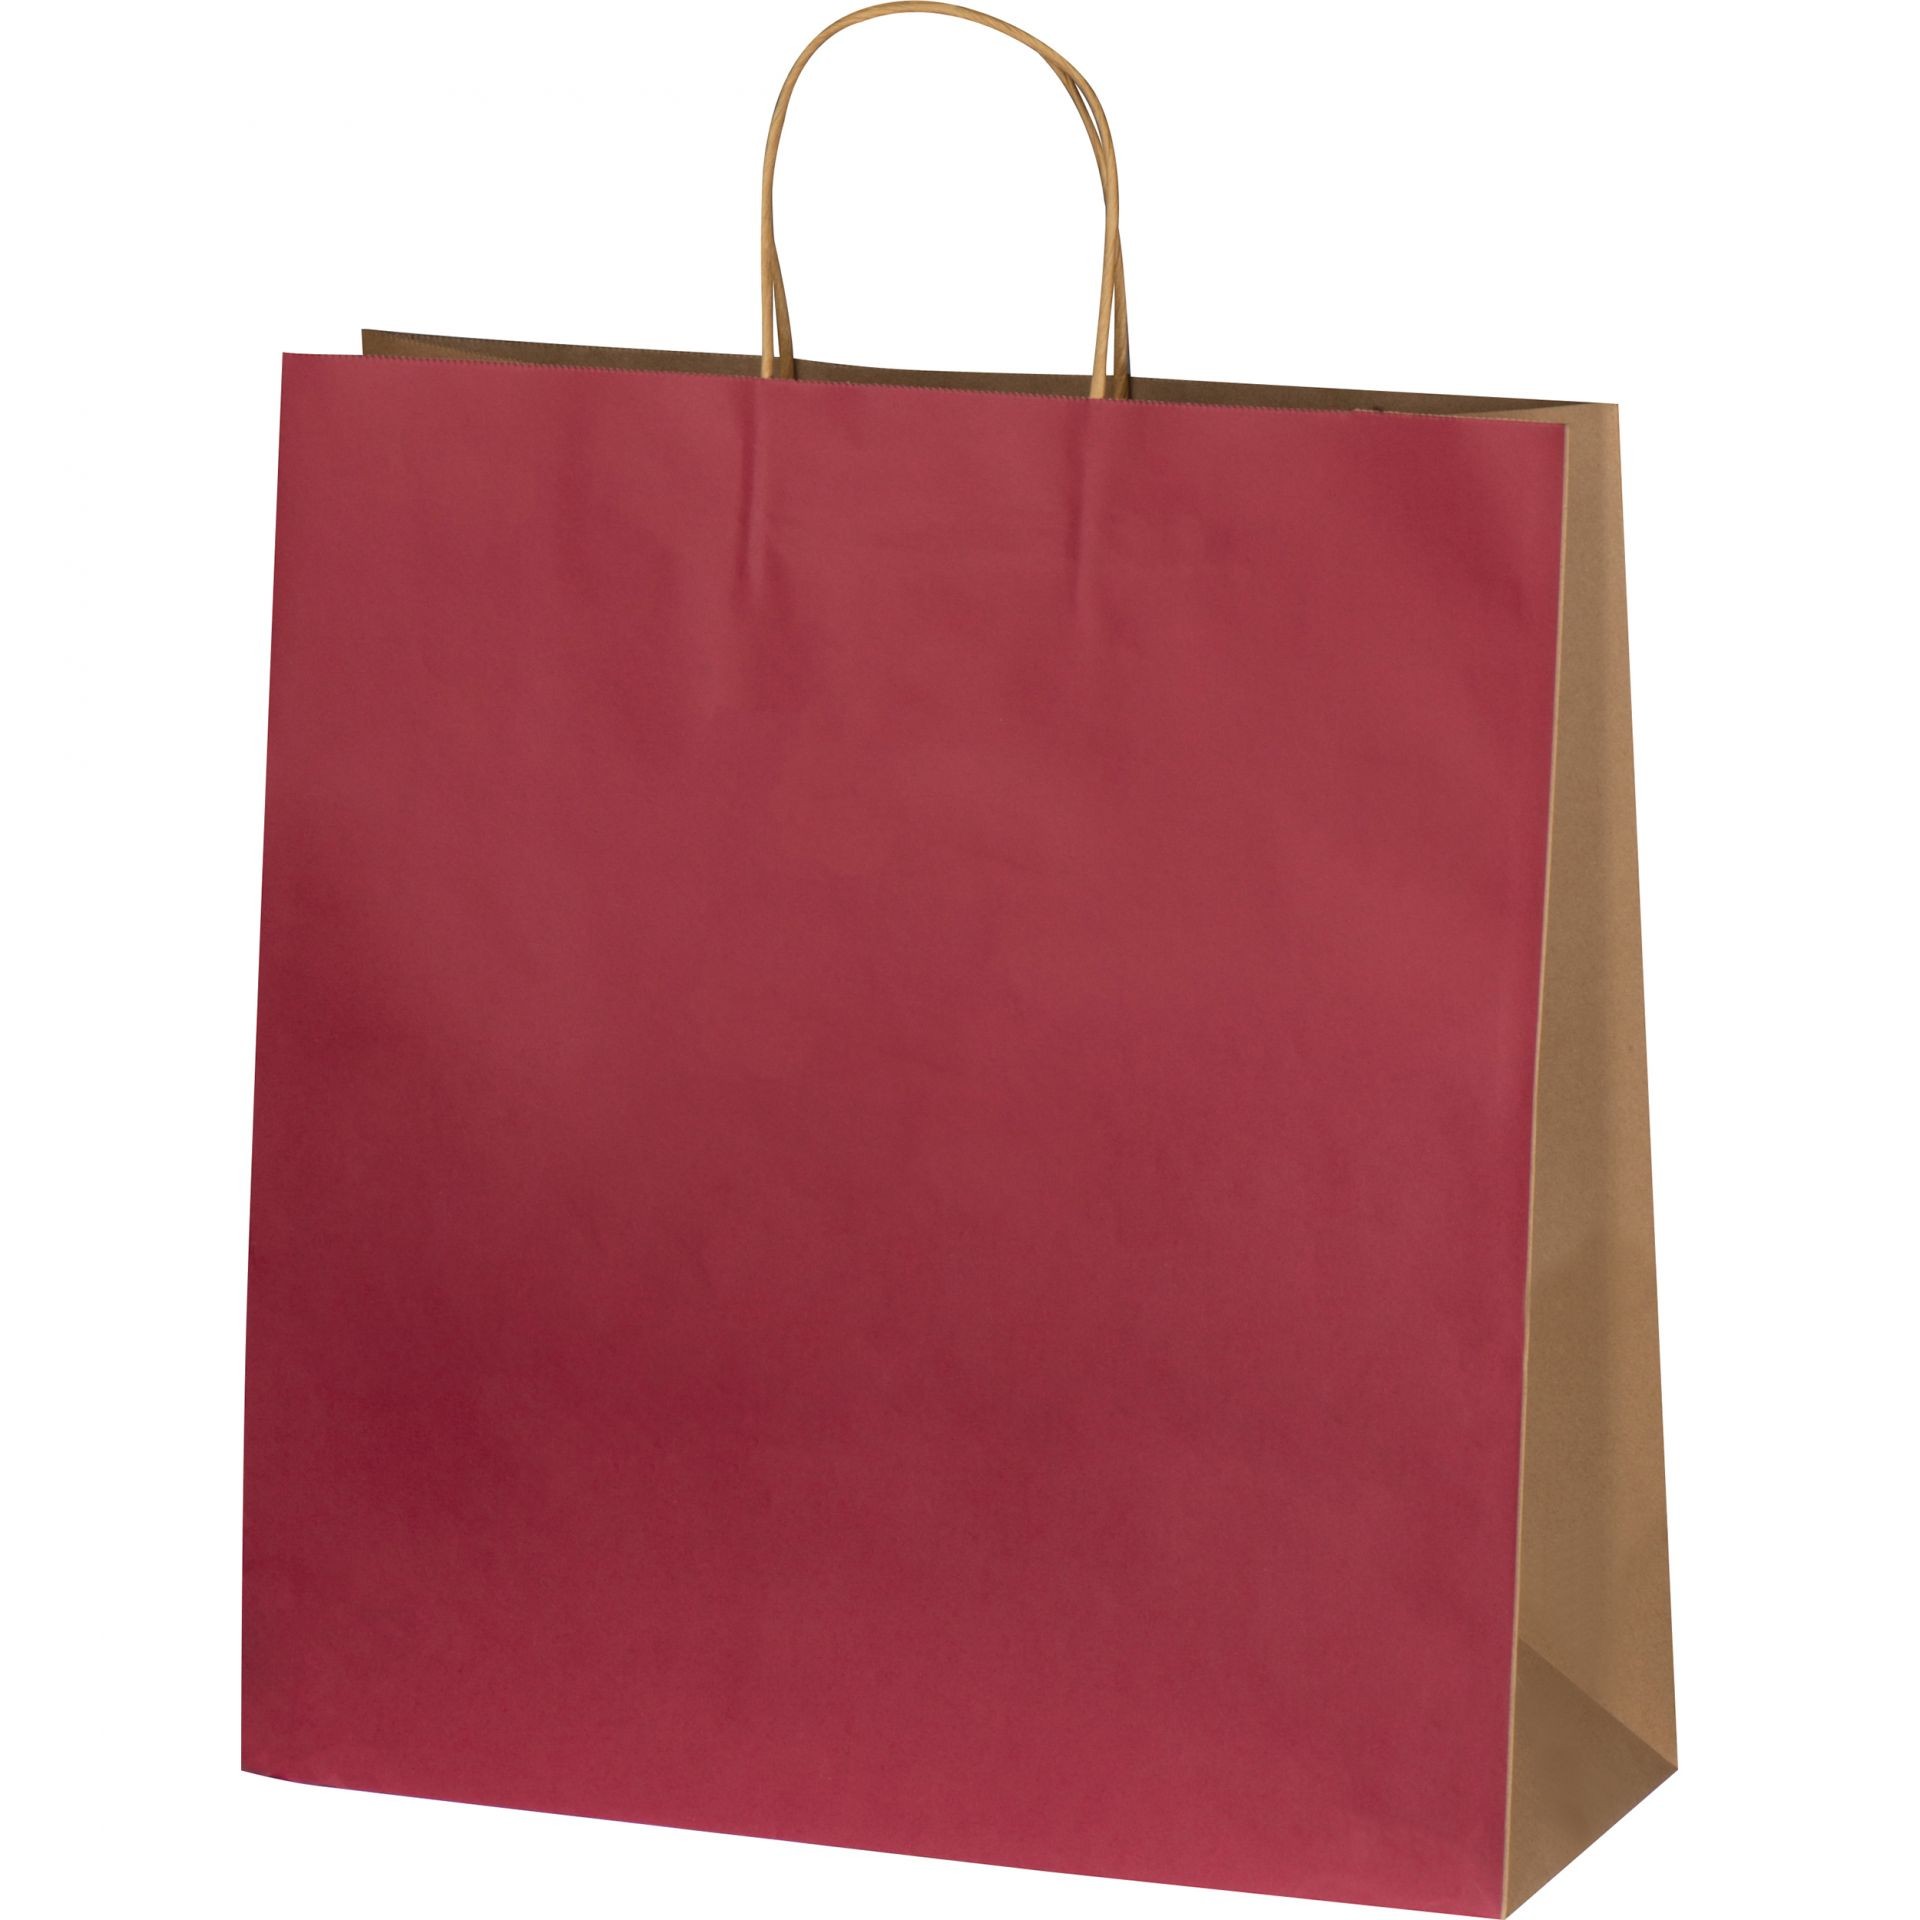 Small recycled paperbag with 2 handles